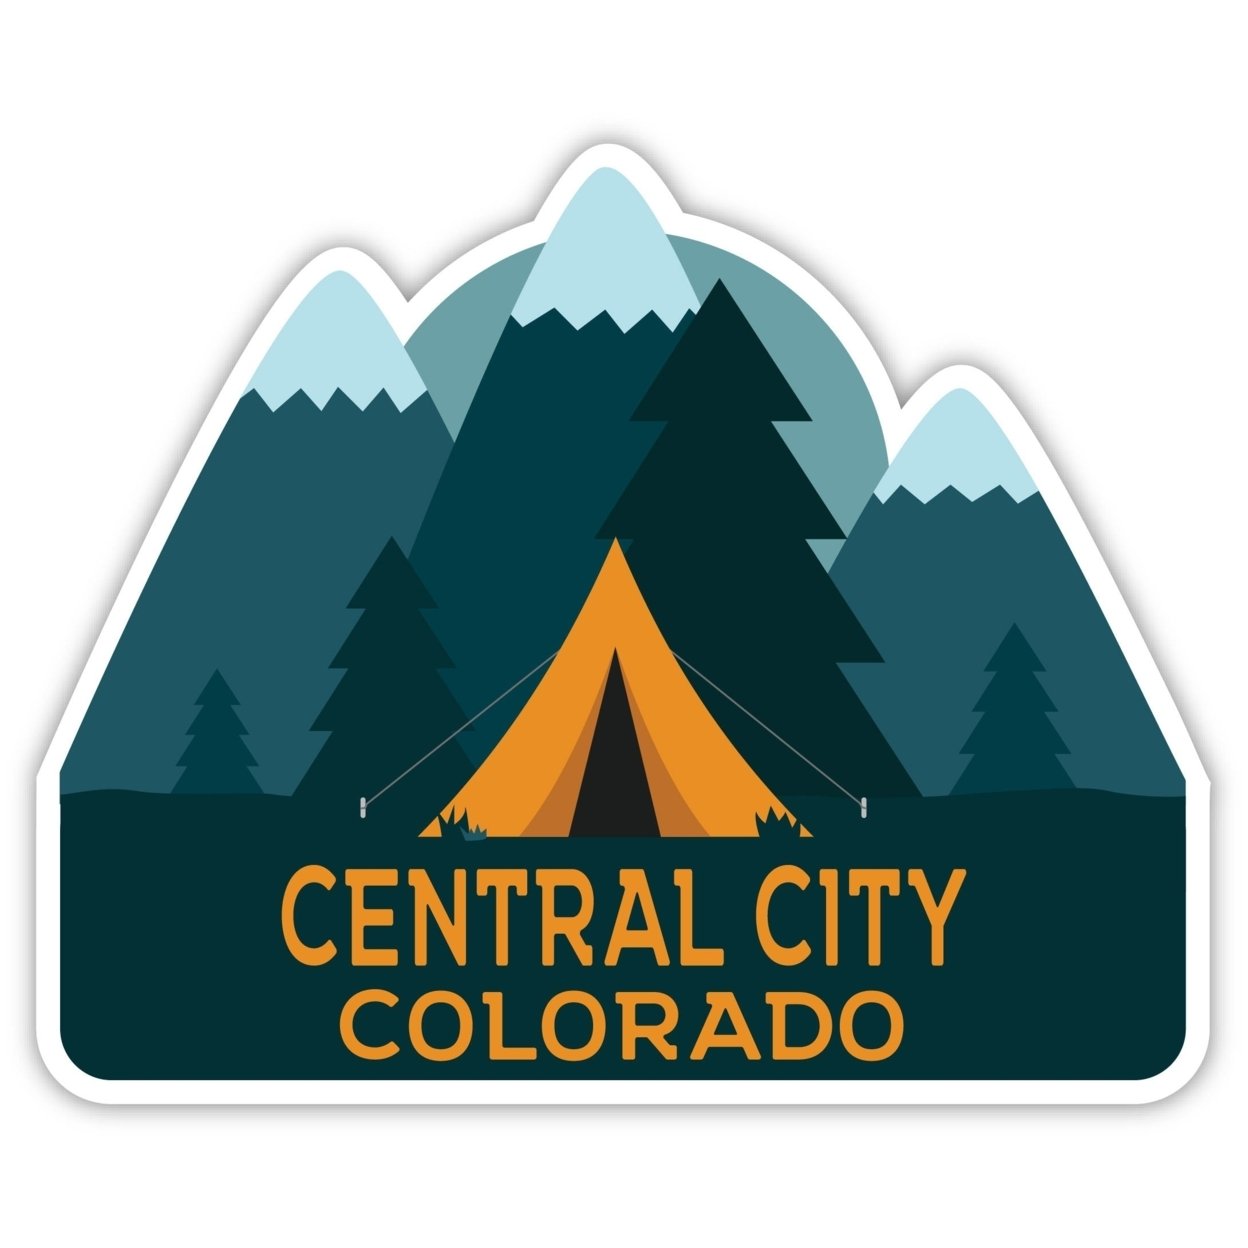 Central City Colorado Souvenir Decorative Stickers (Choose Theme And Size) - 4-Pack, 12-Inch, Bear